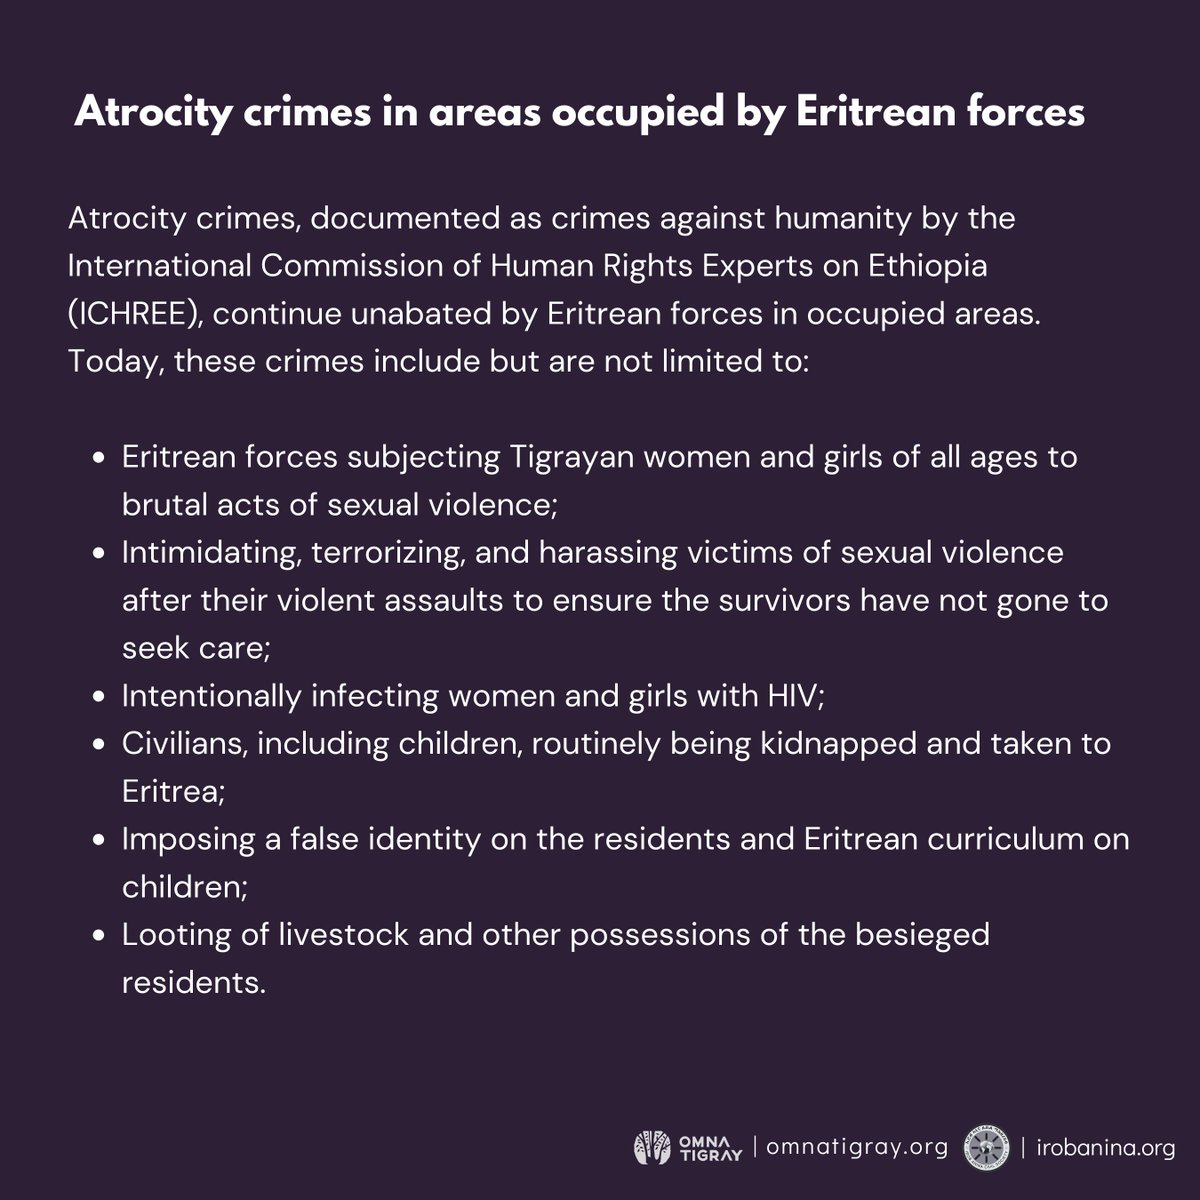 Atrocity crimes, documented as crimes against humanity by the International Commission of Human Rights Experts on Ethiopia (#ICHREE), continue unabated by Eritrean forces in occupied areas. Crimes include forced disappearances & weaponized sexual violence.